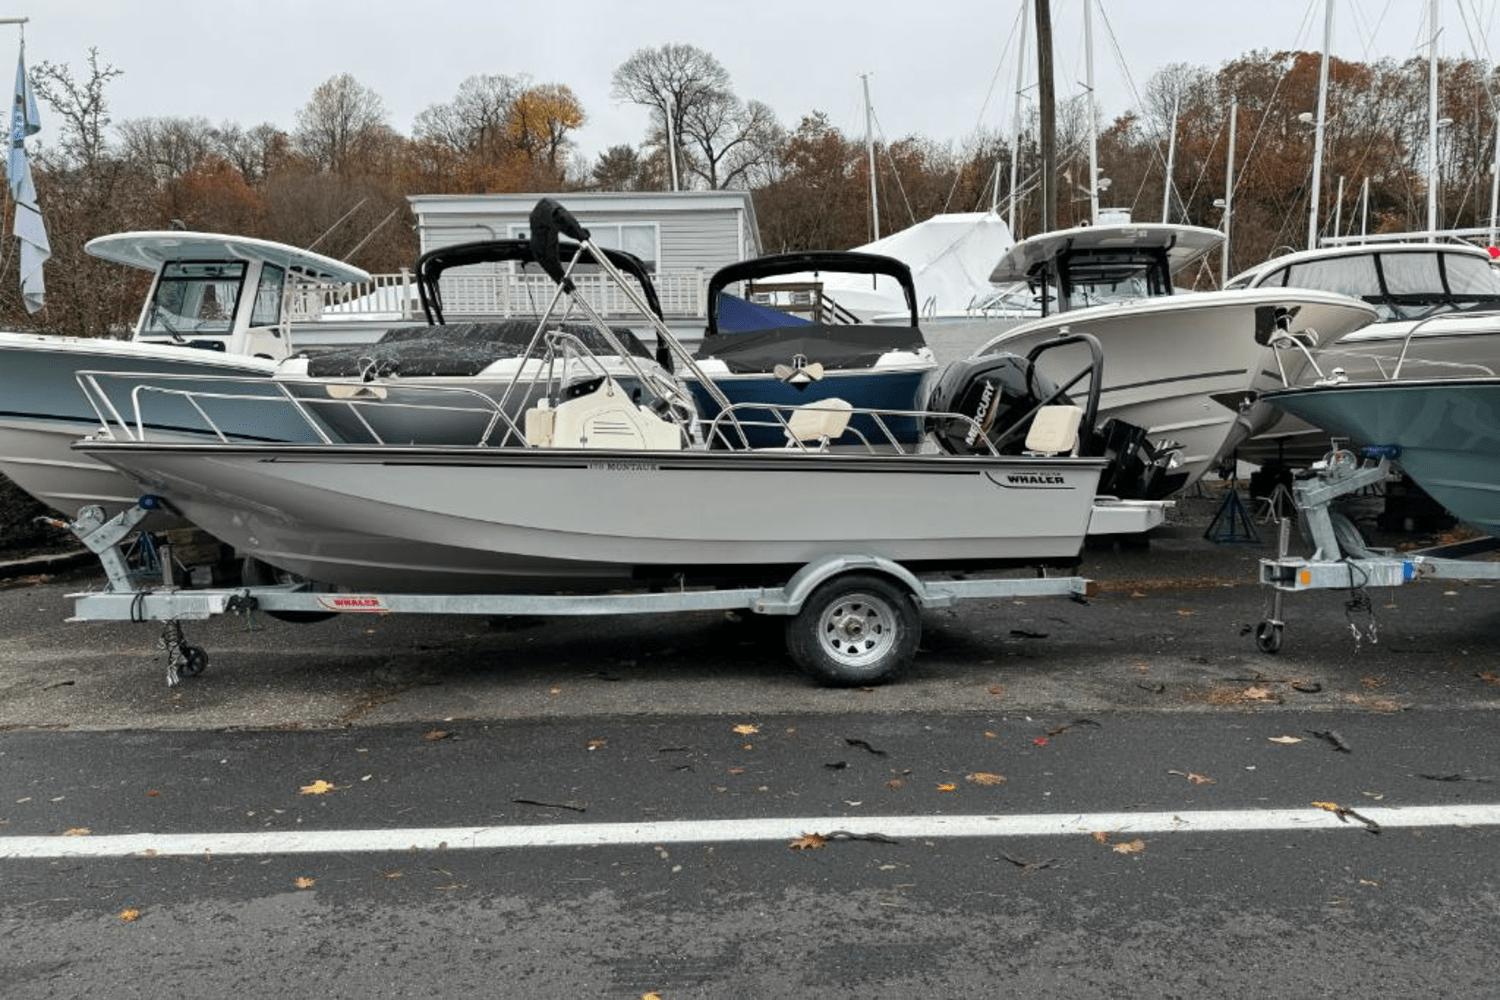 Boats for sale in Danvers - Boat Trader